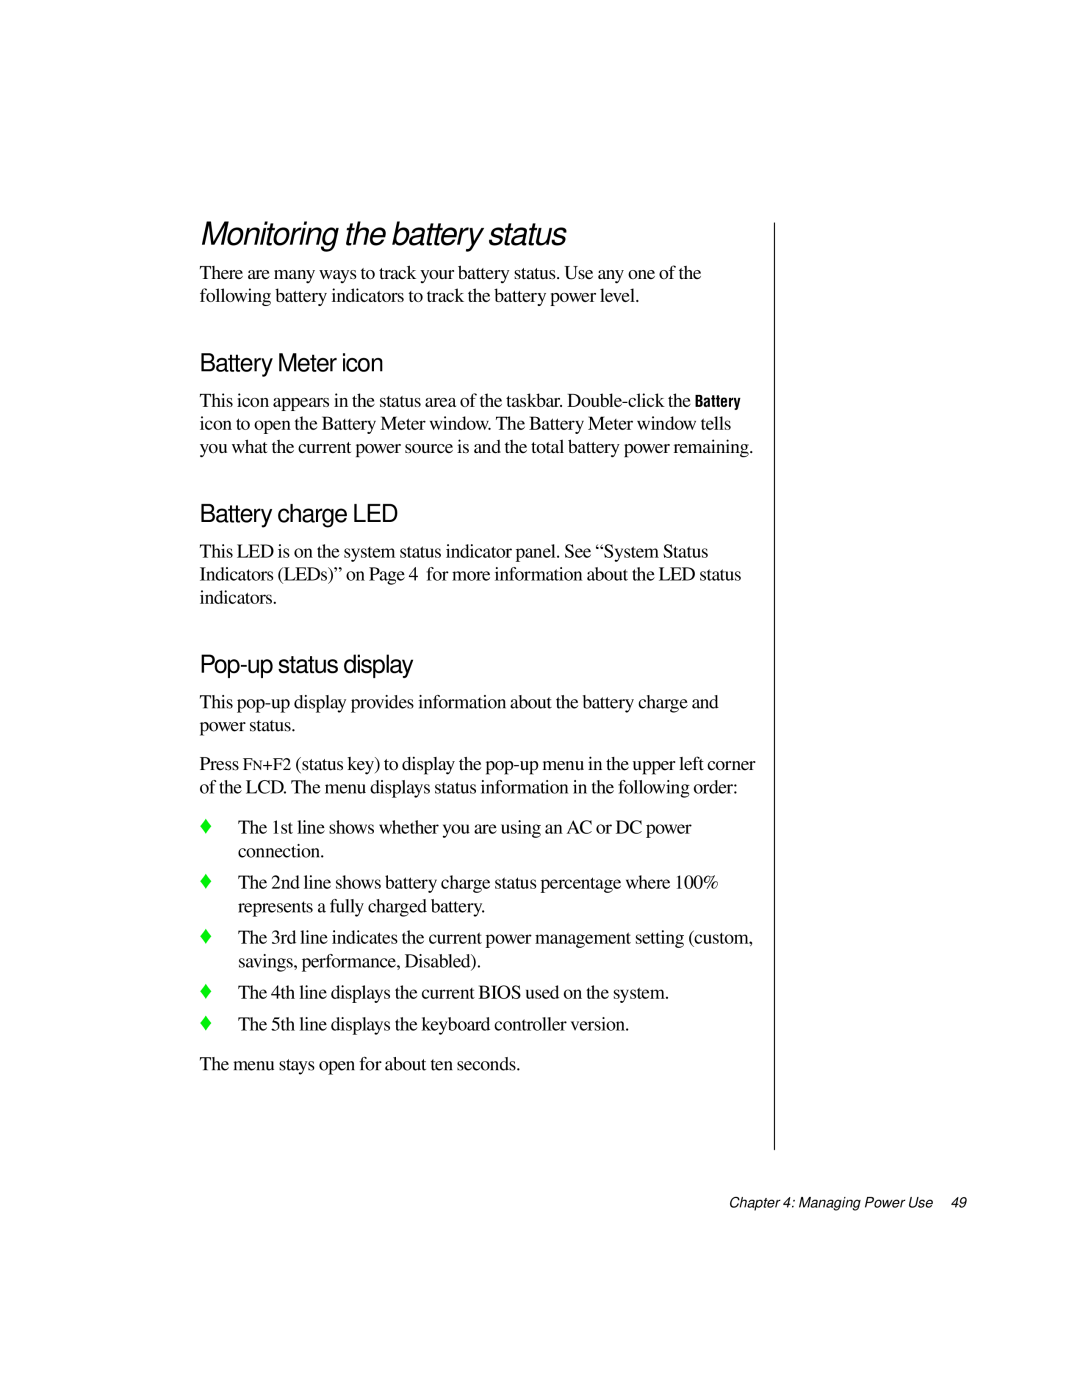 Gateway TM 5150 manual Monitoring the battery status, Battery Meter icon, Battery charge LED, Pop-up status display 